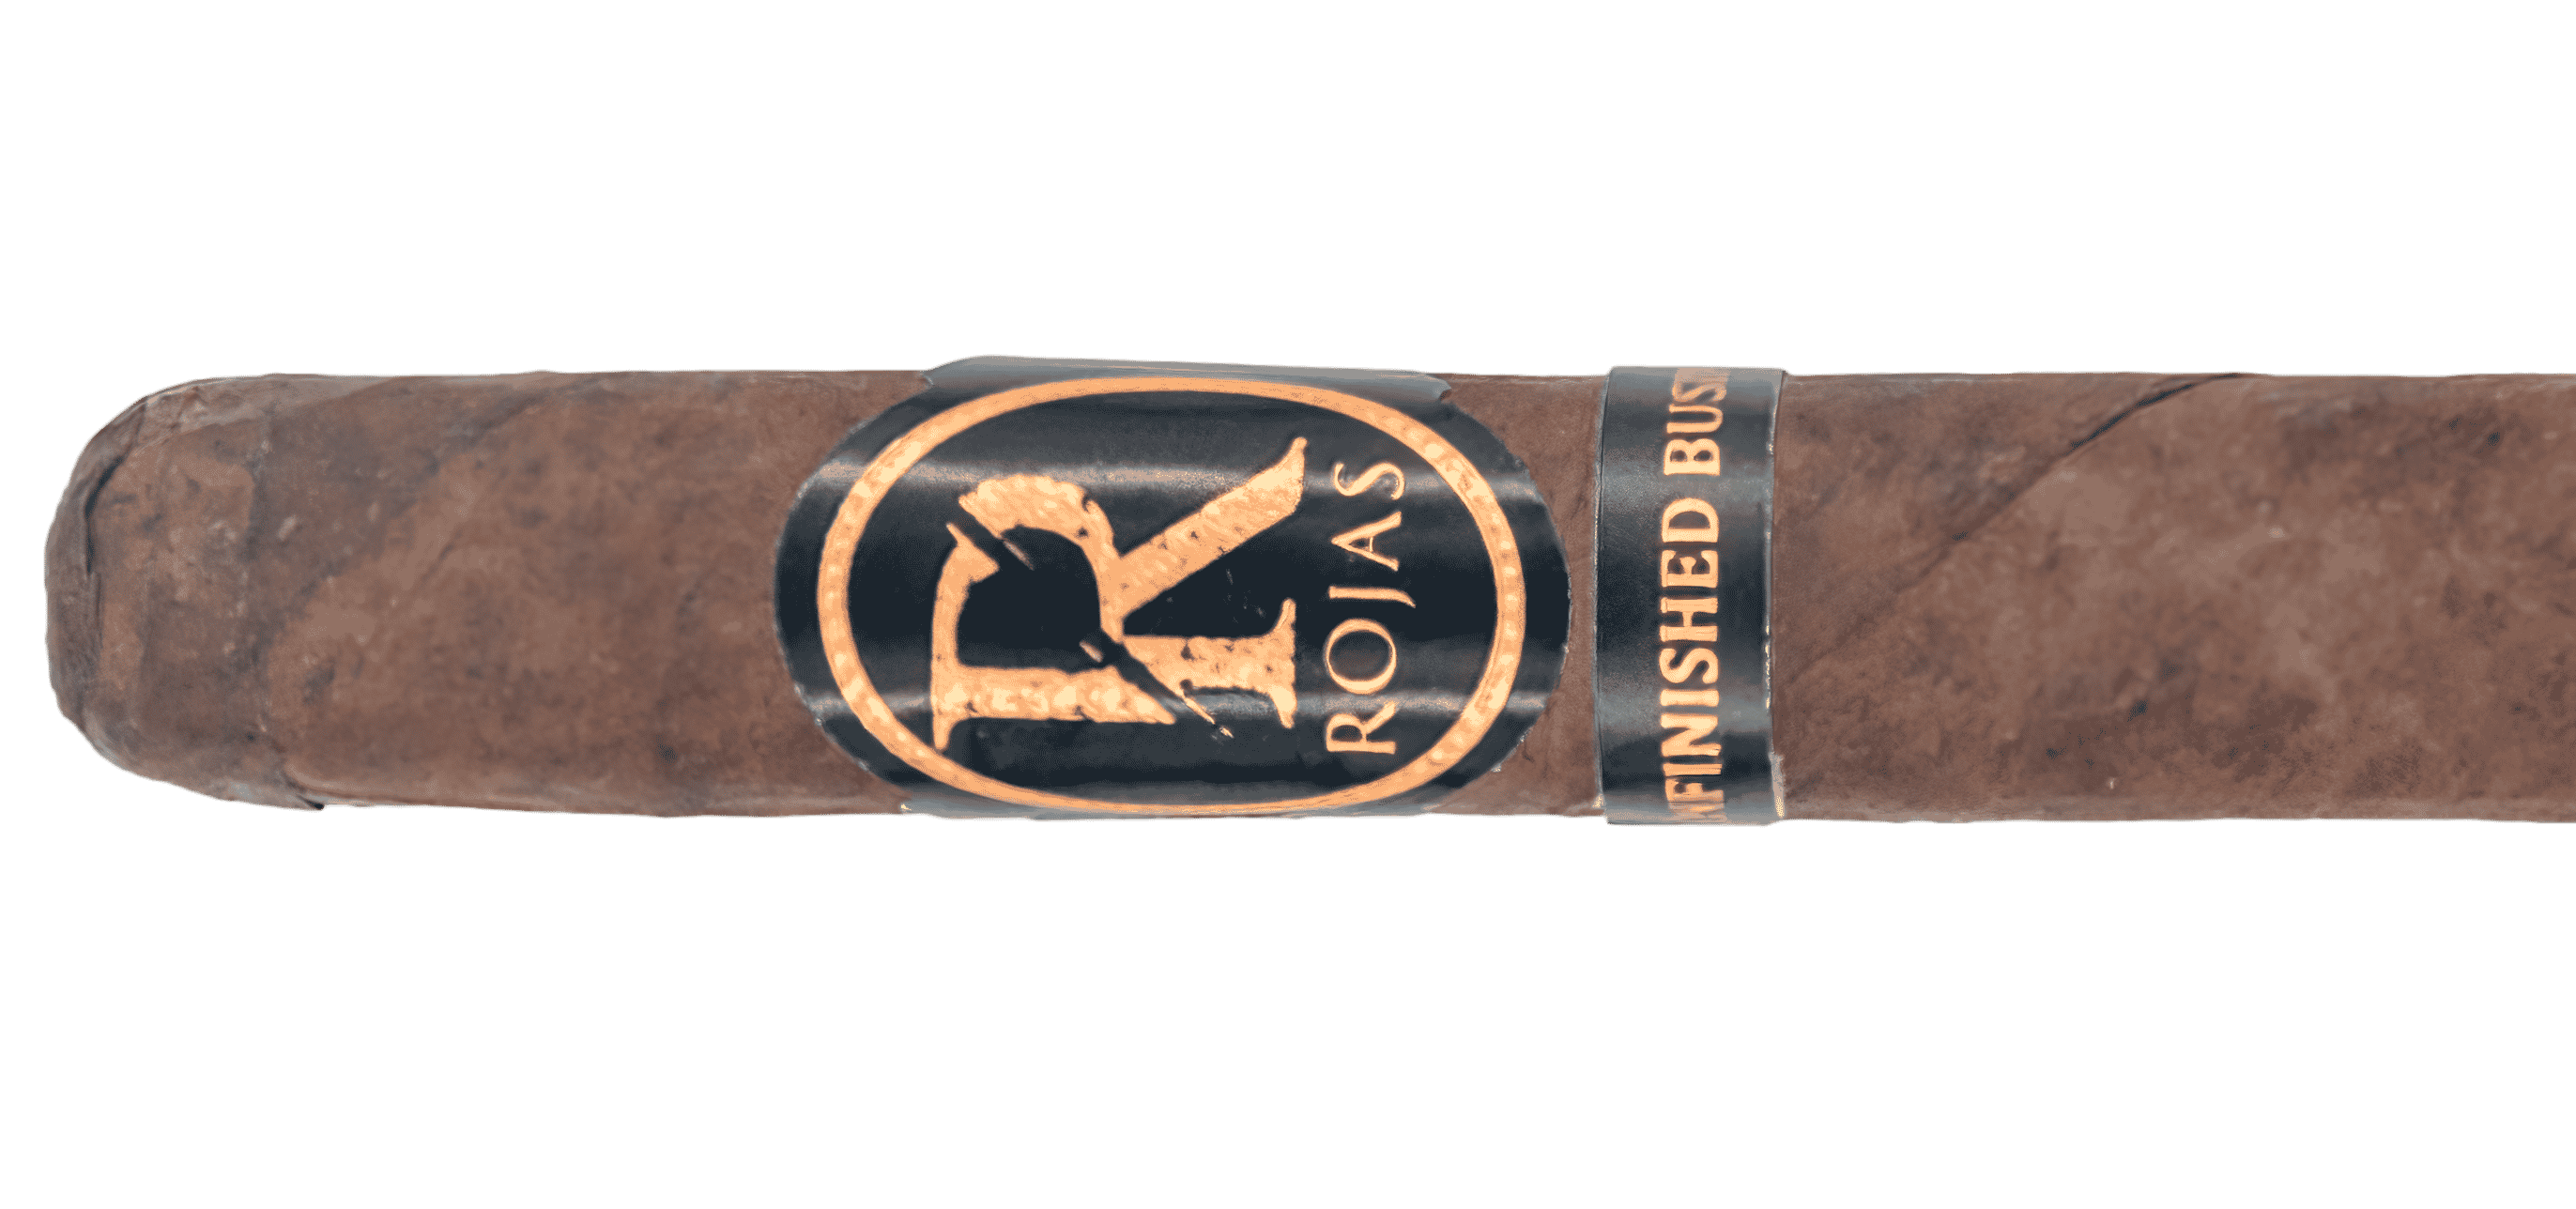 rojas-unfinished-business-corona-gorda-–-blind-cigar-review